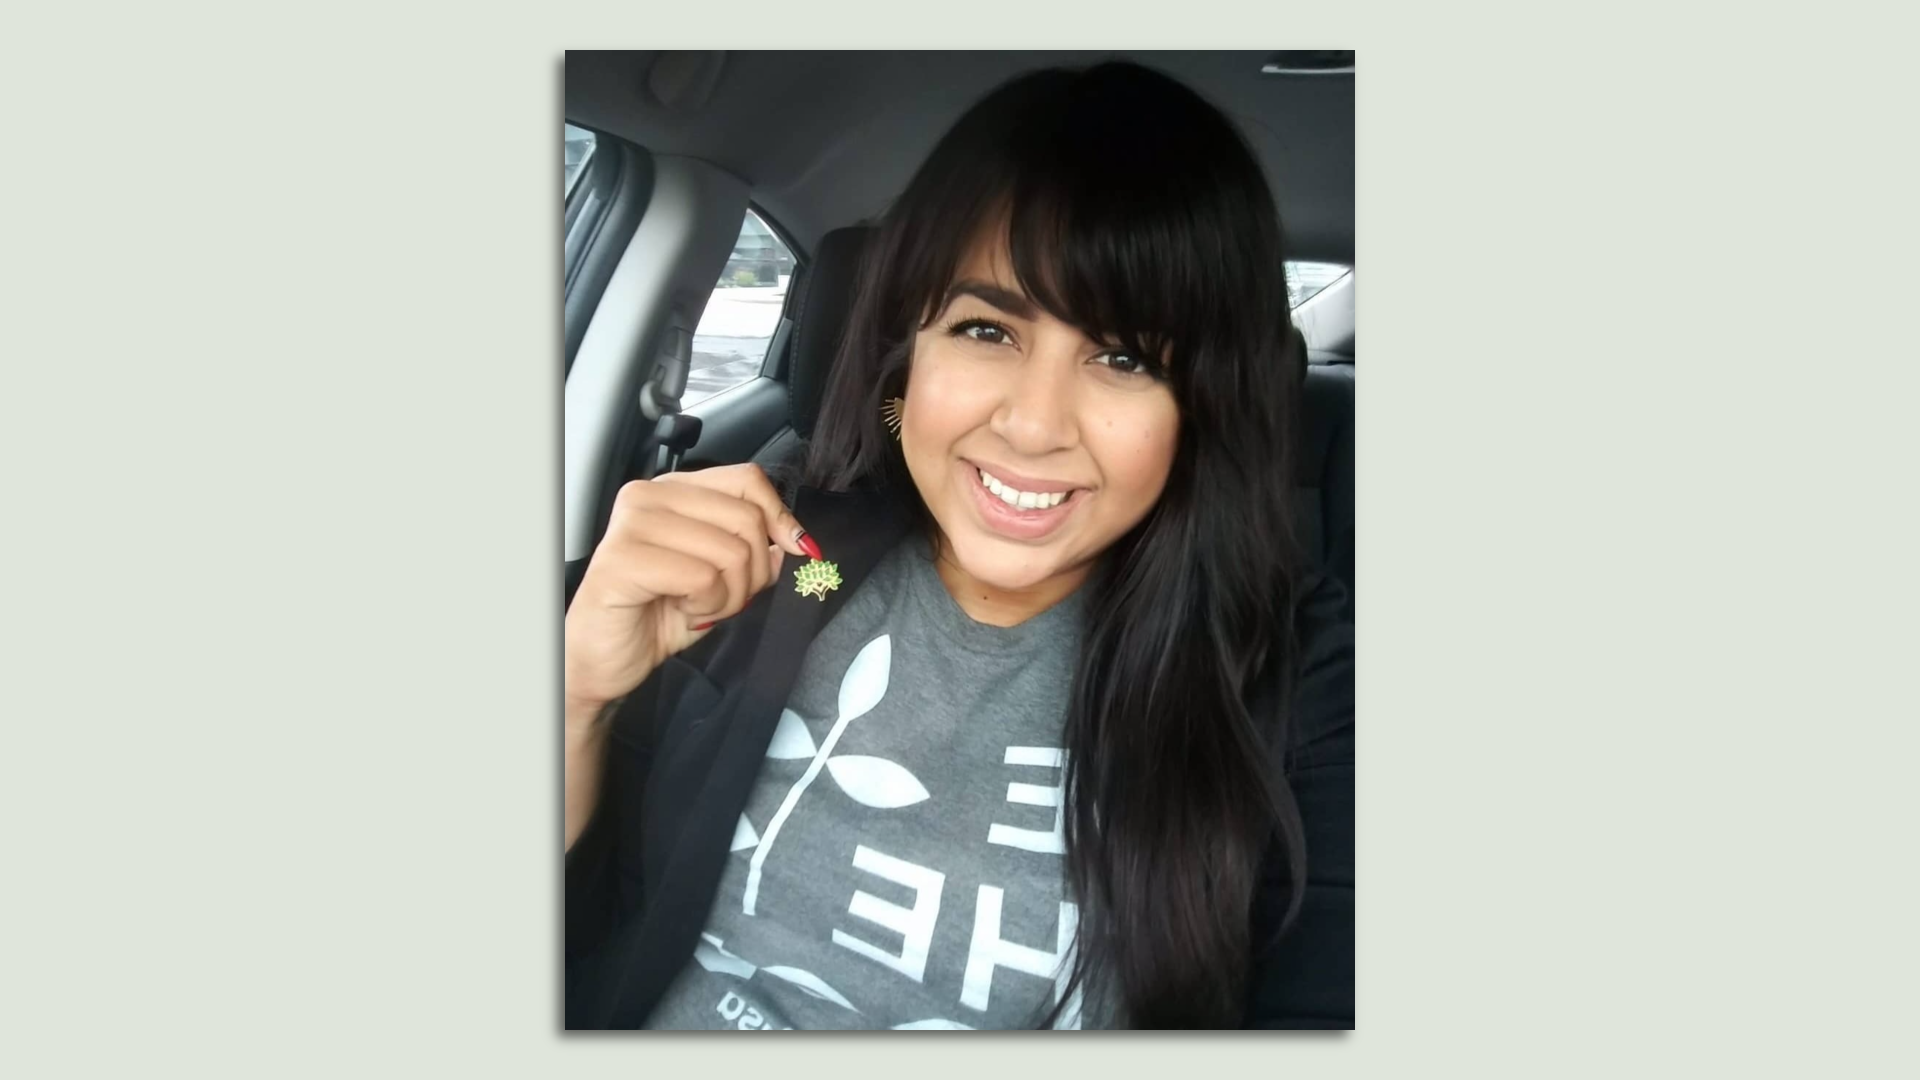 A selfie of Stephanie Cedeño holding her coat to show a pin of the Besa logo